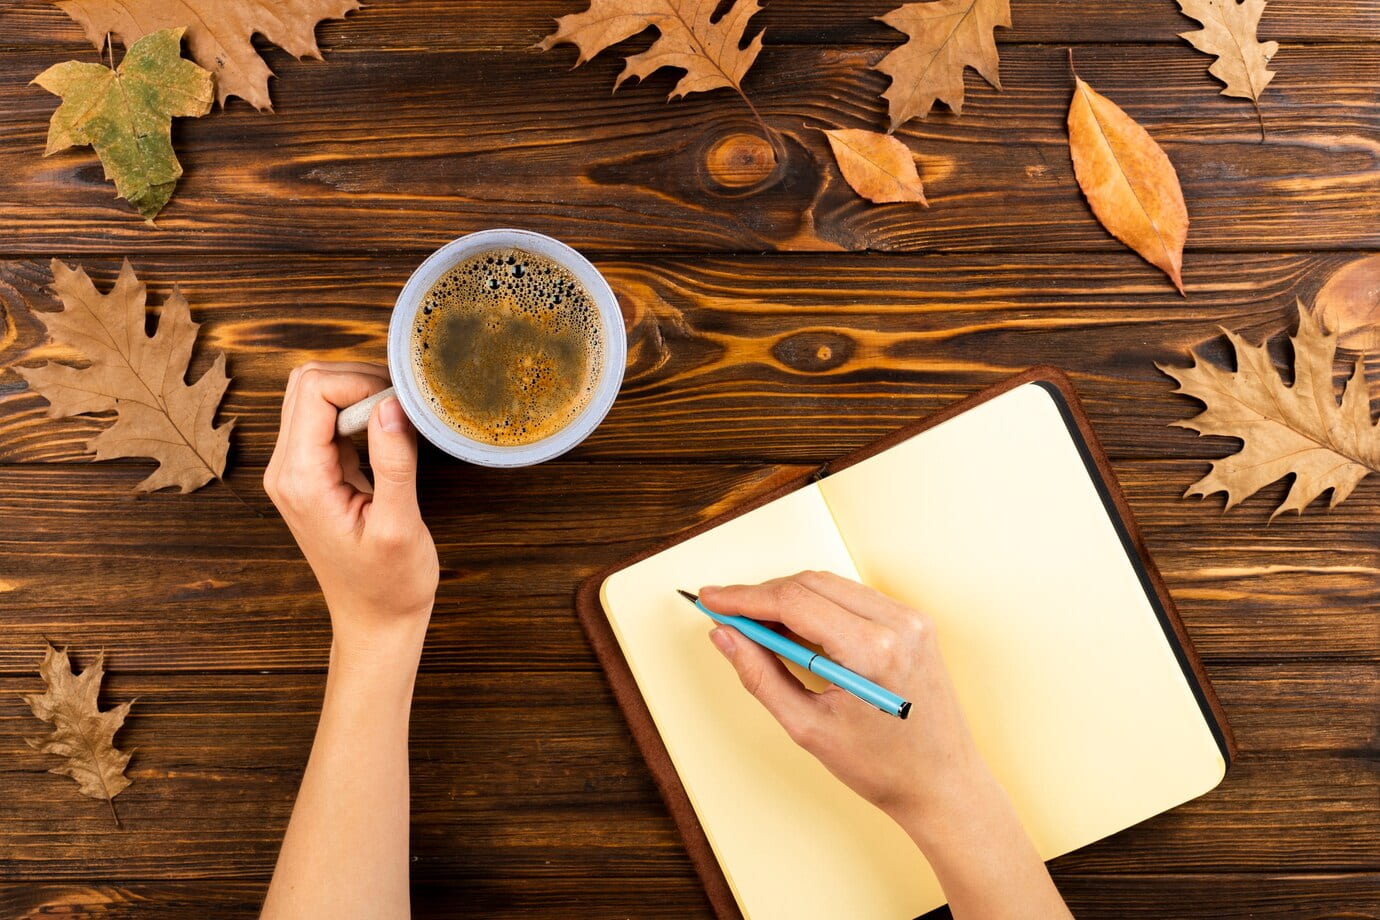 A wooden surface where someone's hands are visible. Left hand is holding a cup of coffee resting on the surface and the right hand is holding a pencil and writing in a blank notebook. Orange autumn leaves seen at the top of the picture.